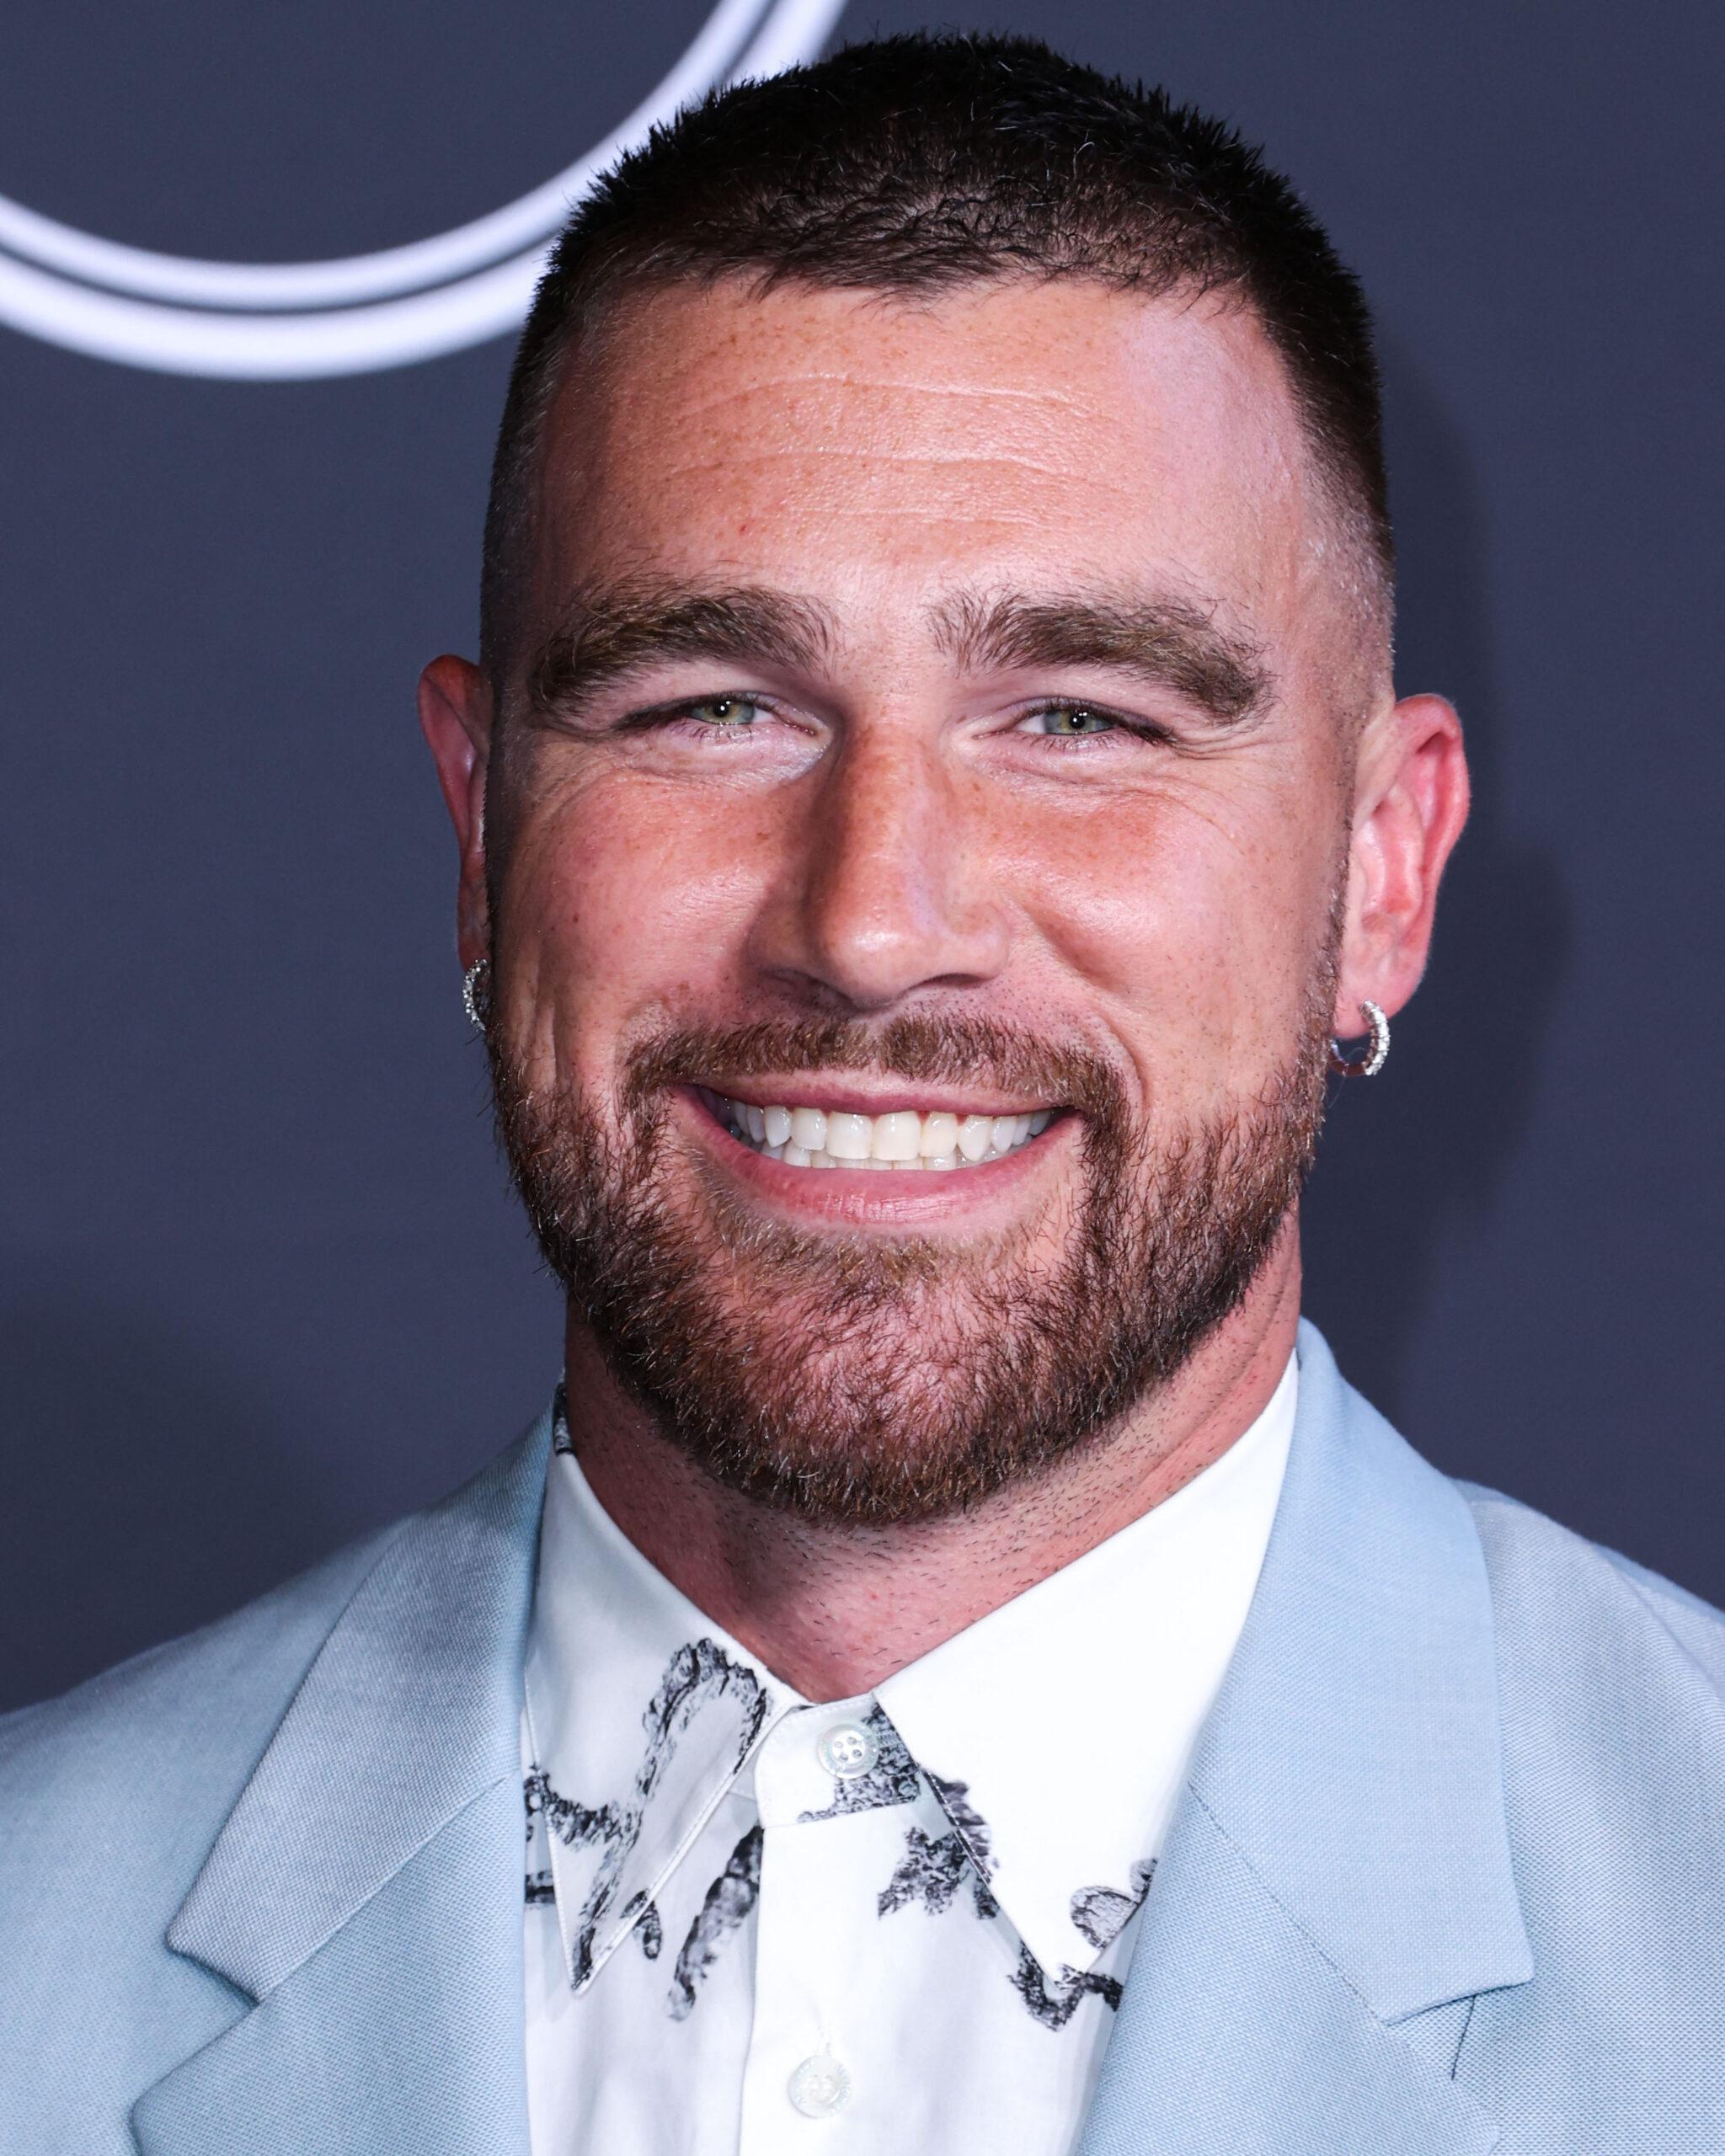 Travis Kelce wears a light blue suit while smiling for the camera